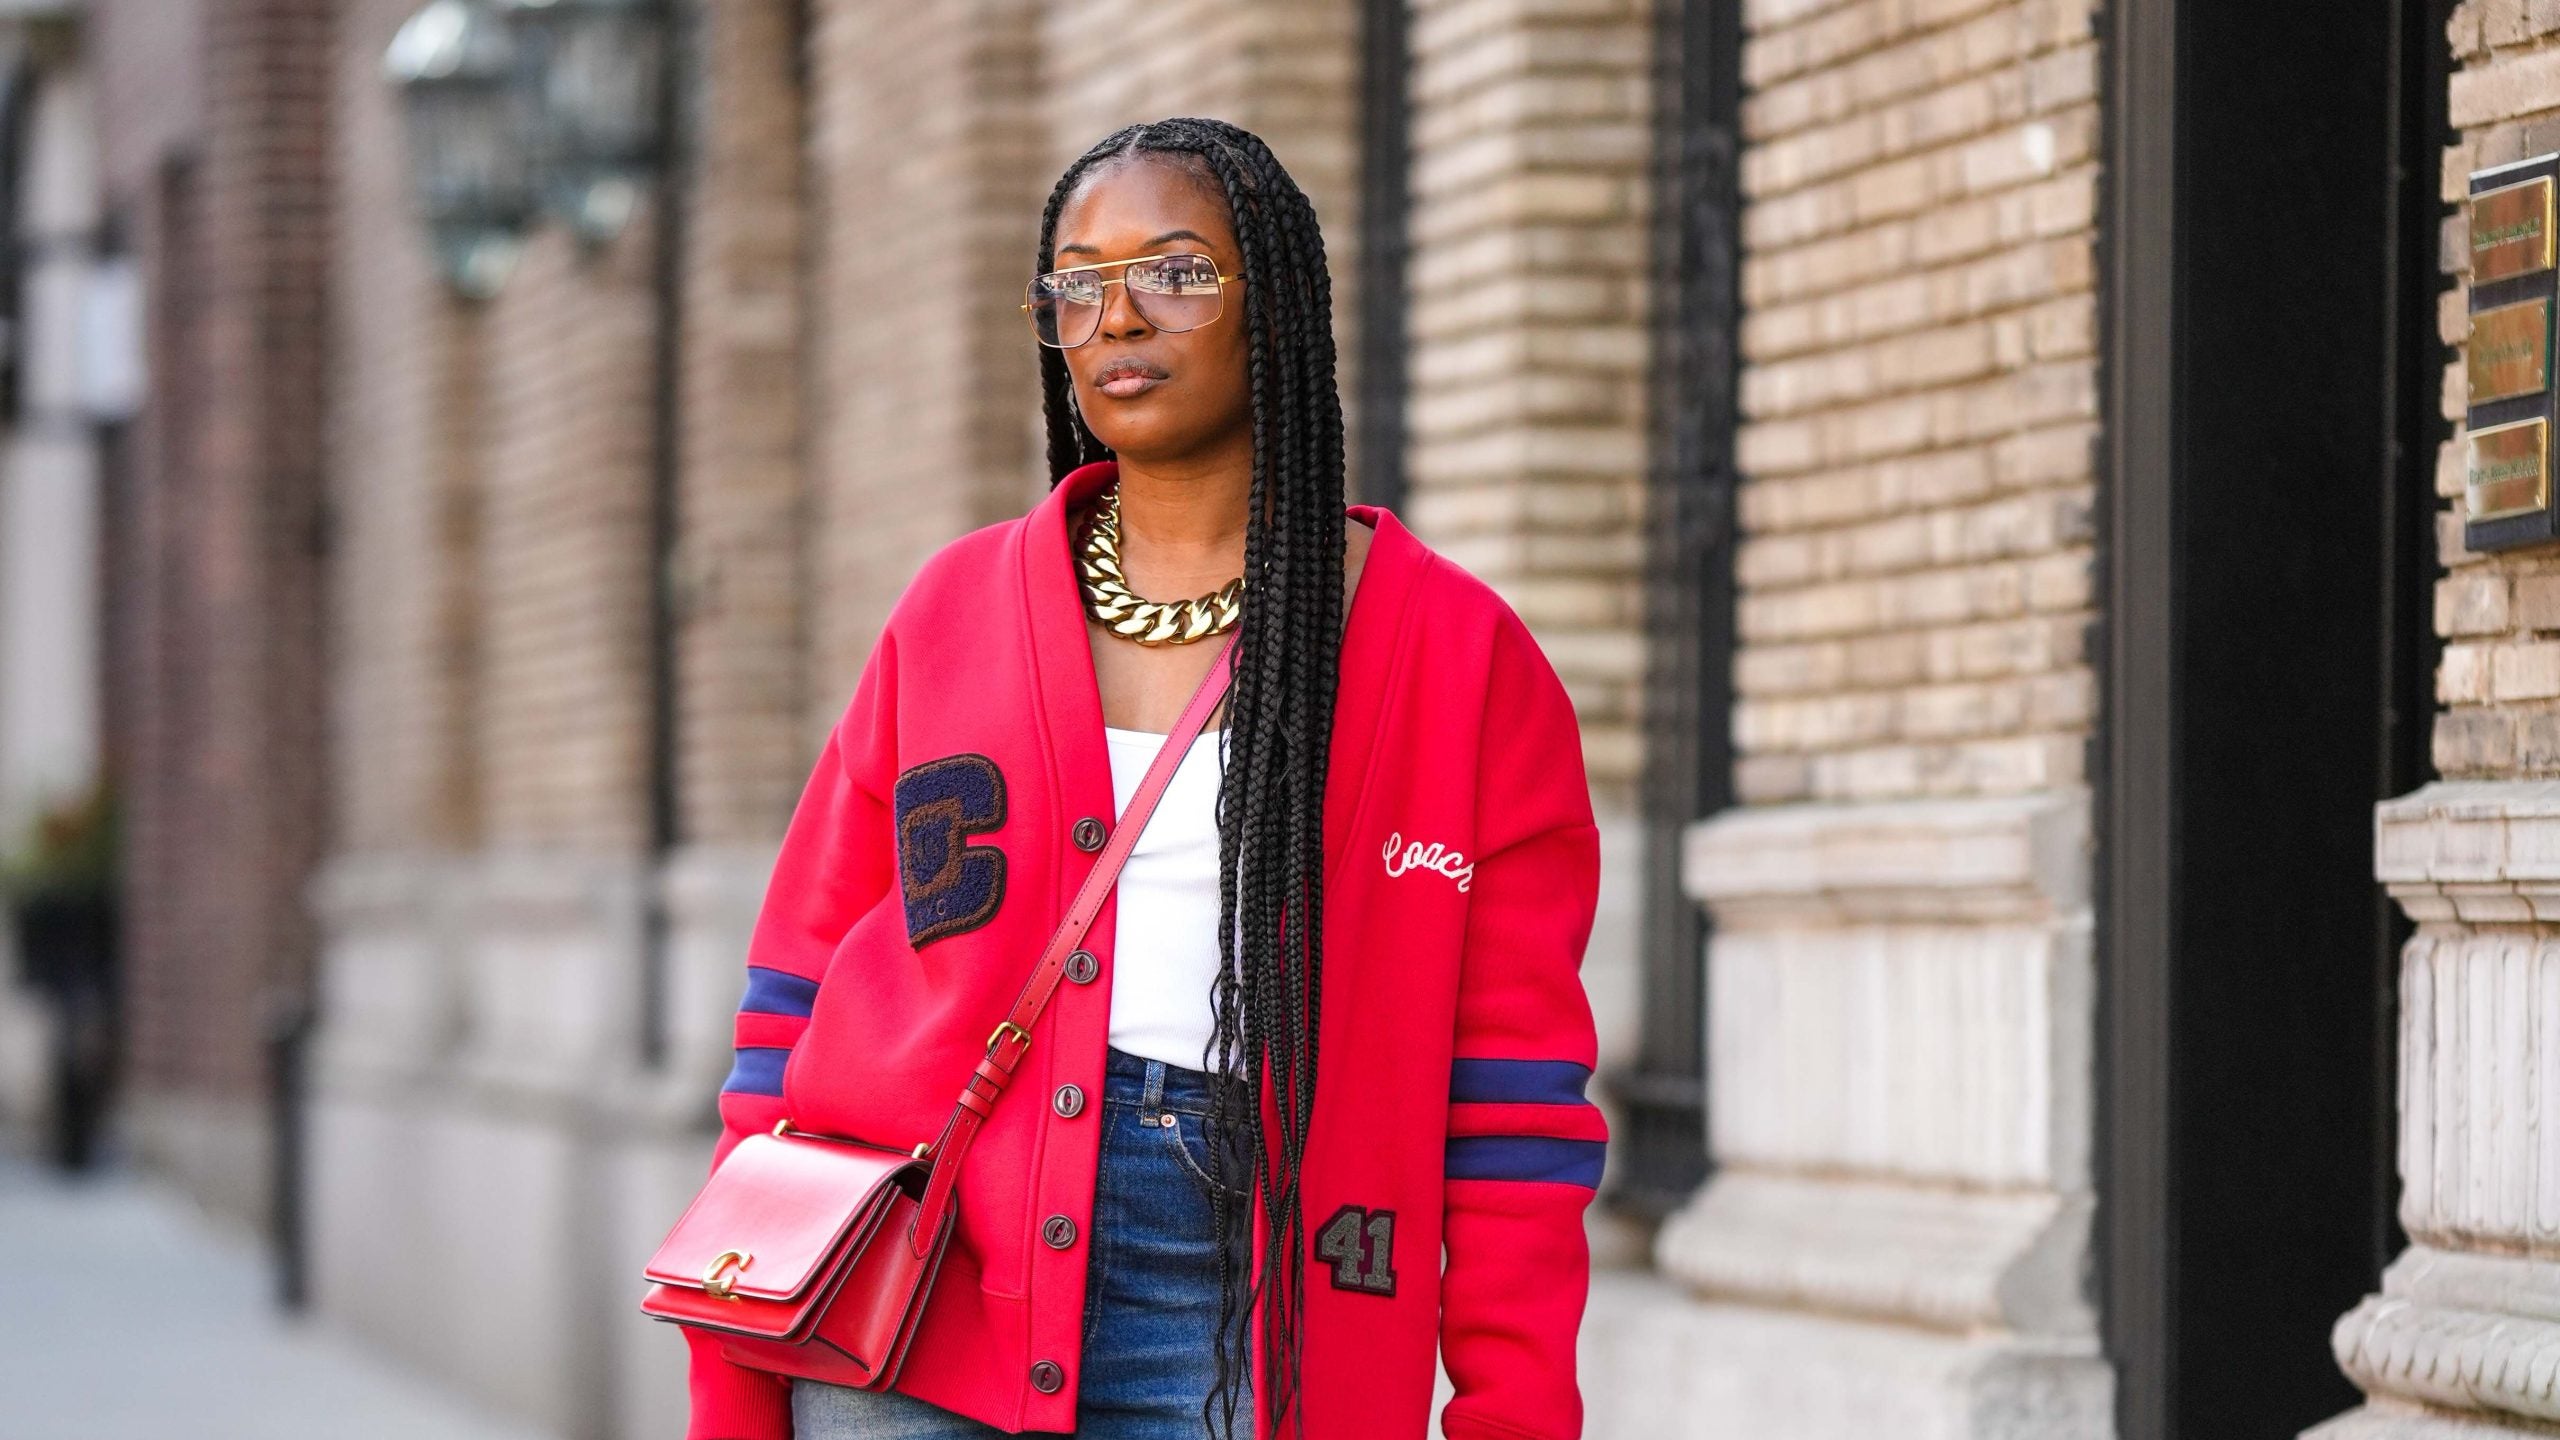 5 Chic Glasses Trends Everyone Will Be Wearing This Summer